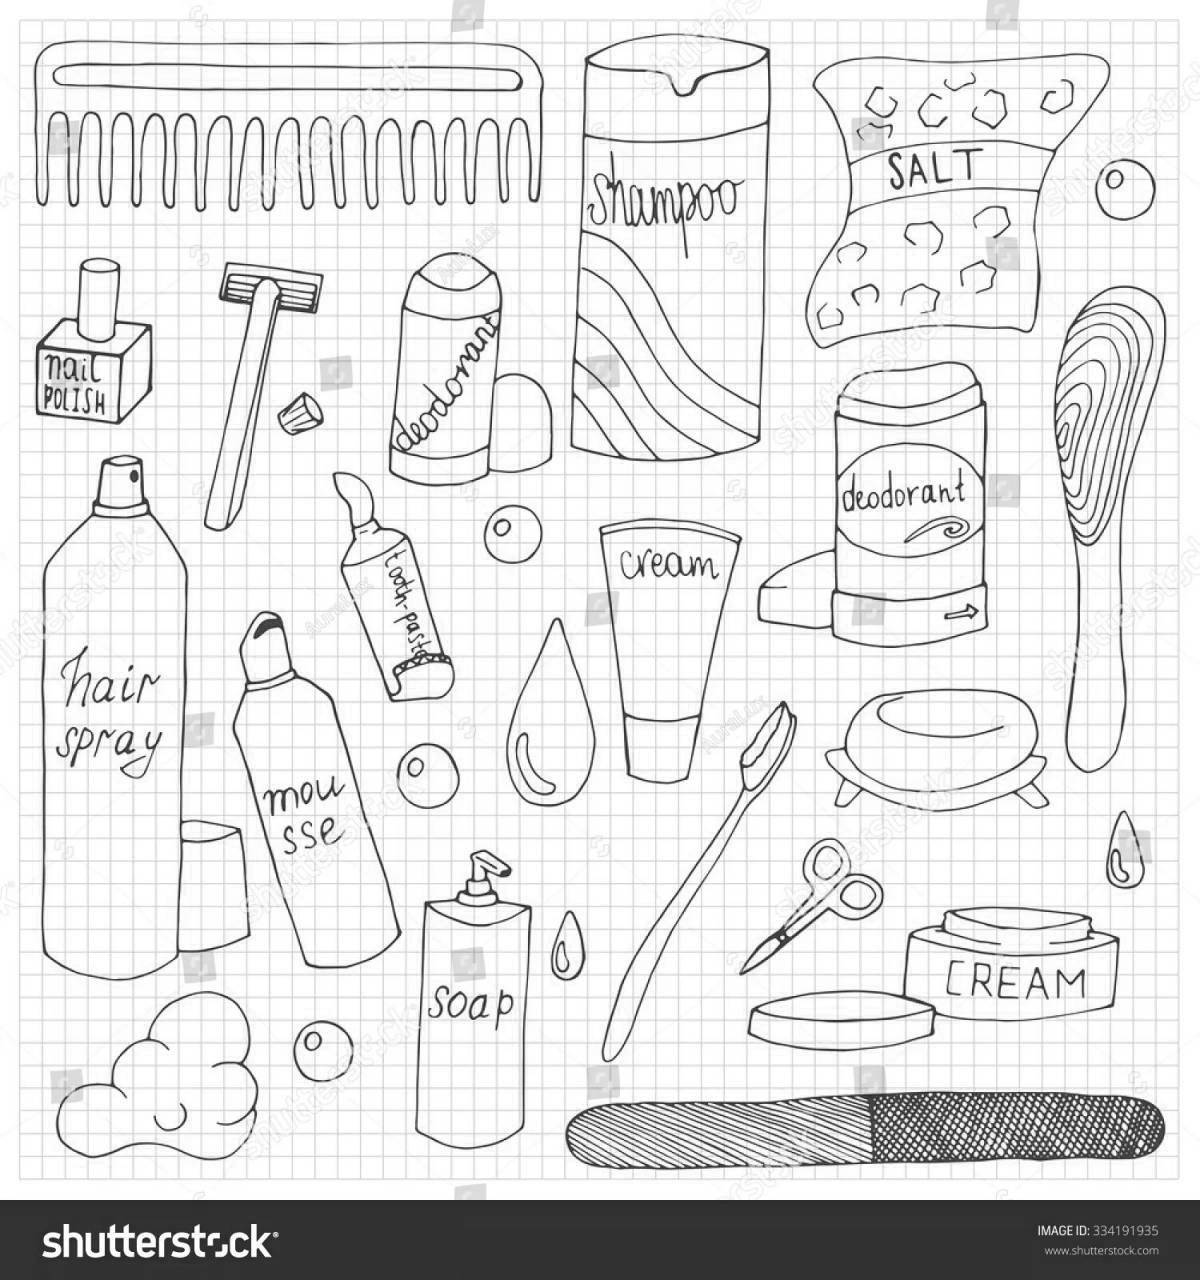 Adorable personal care items coloring book